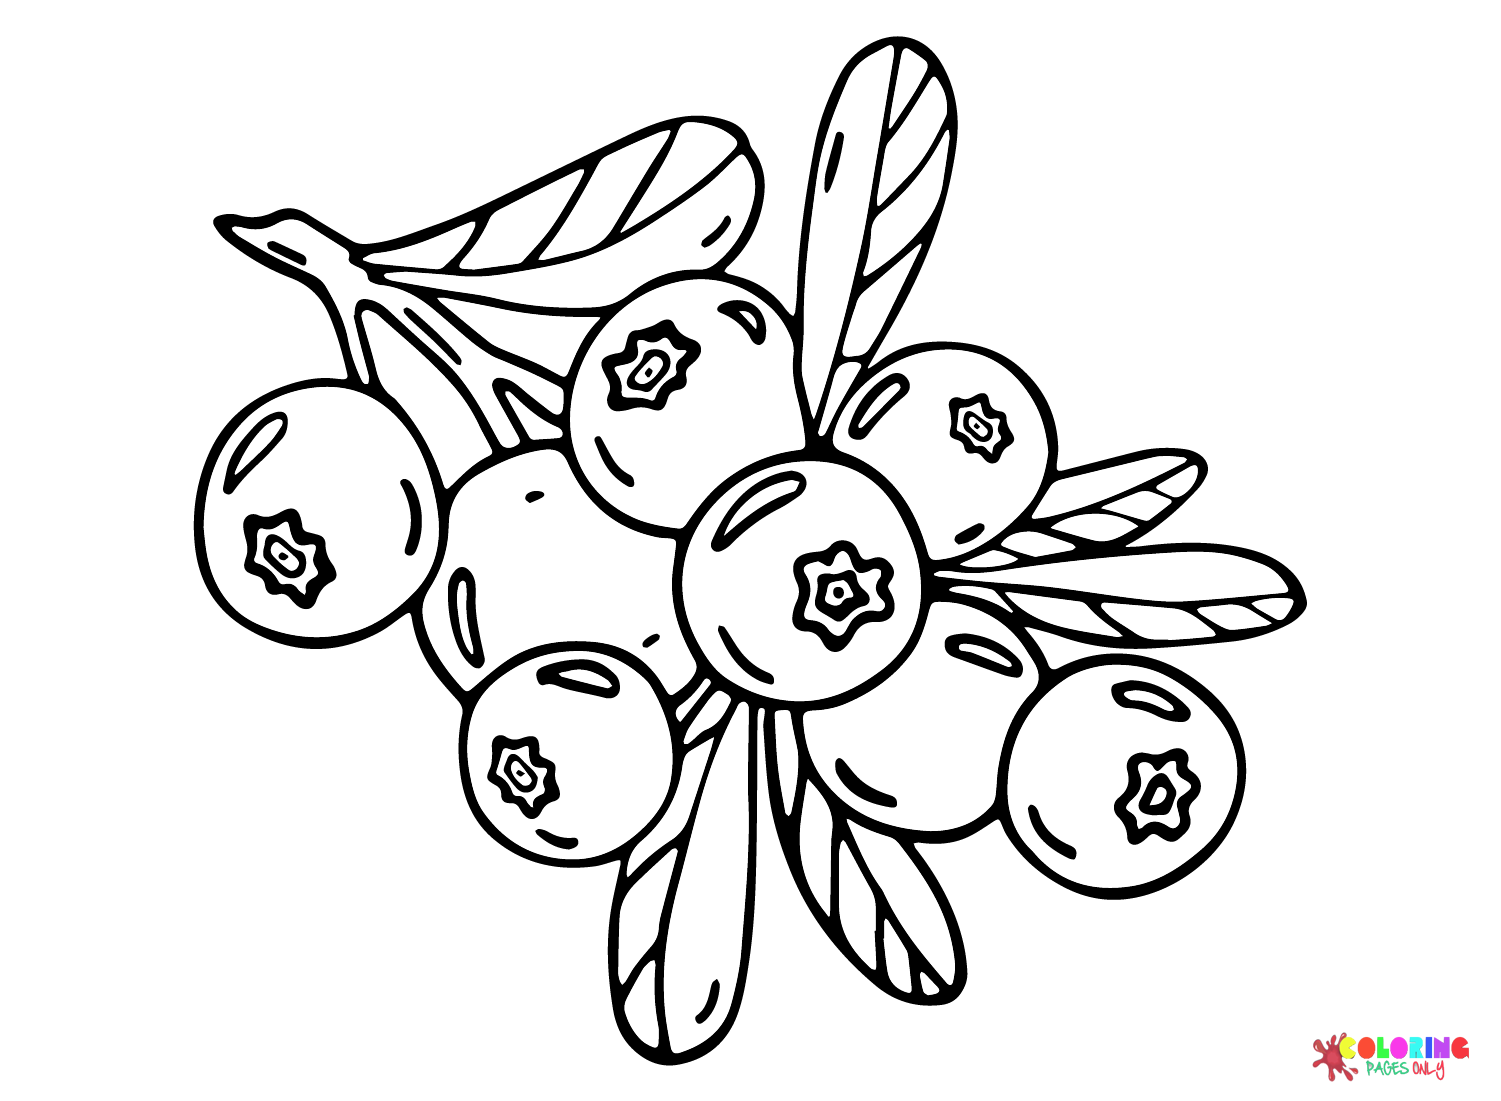 Doodle Blueberry Coloring Page